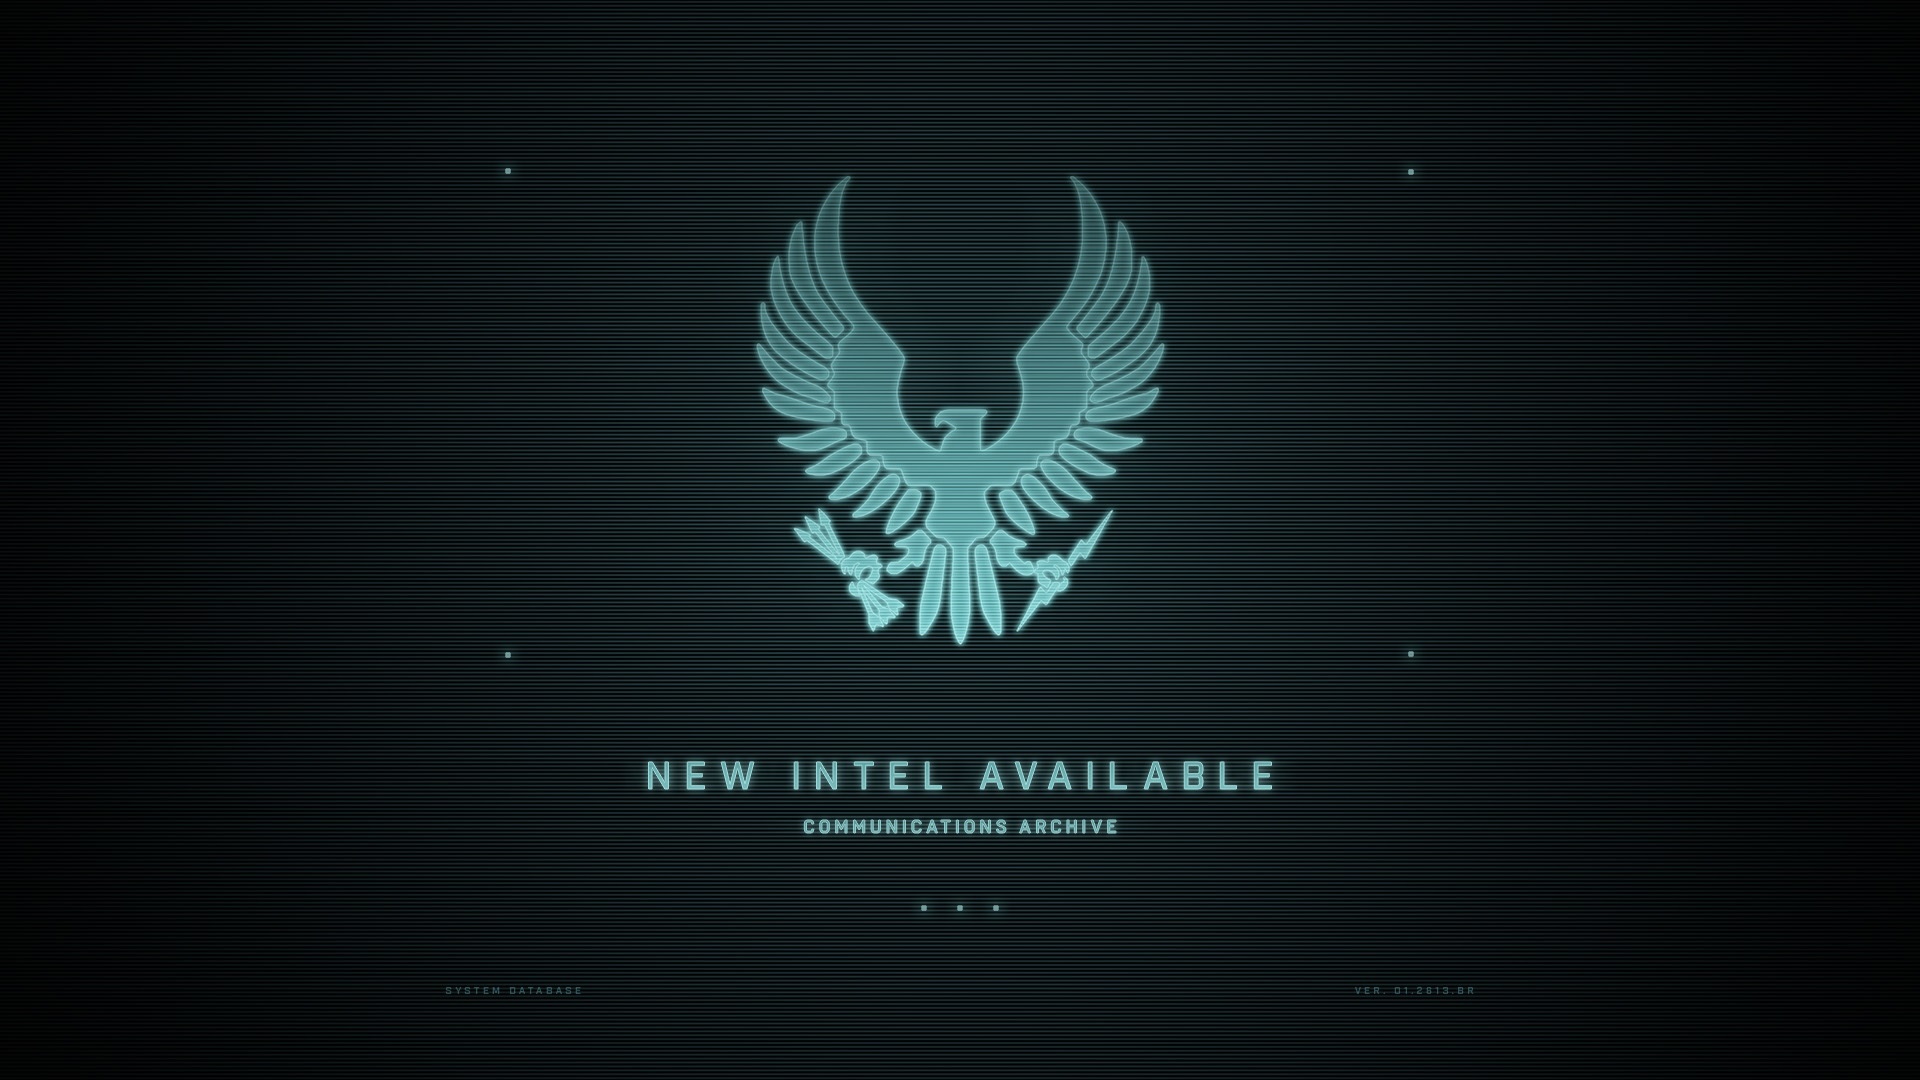 New Intel Available image